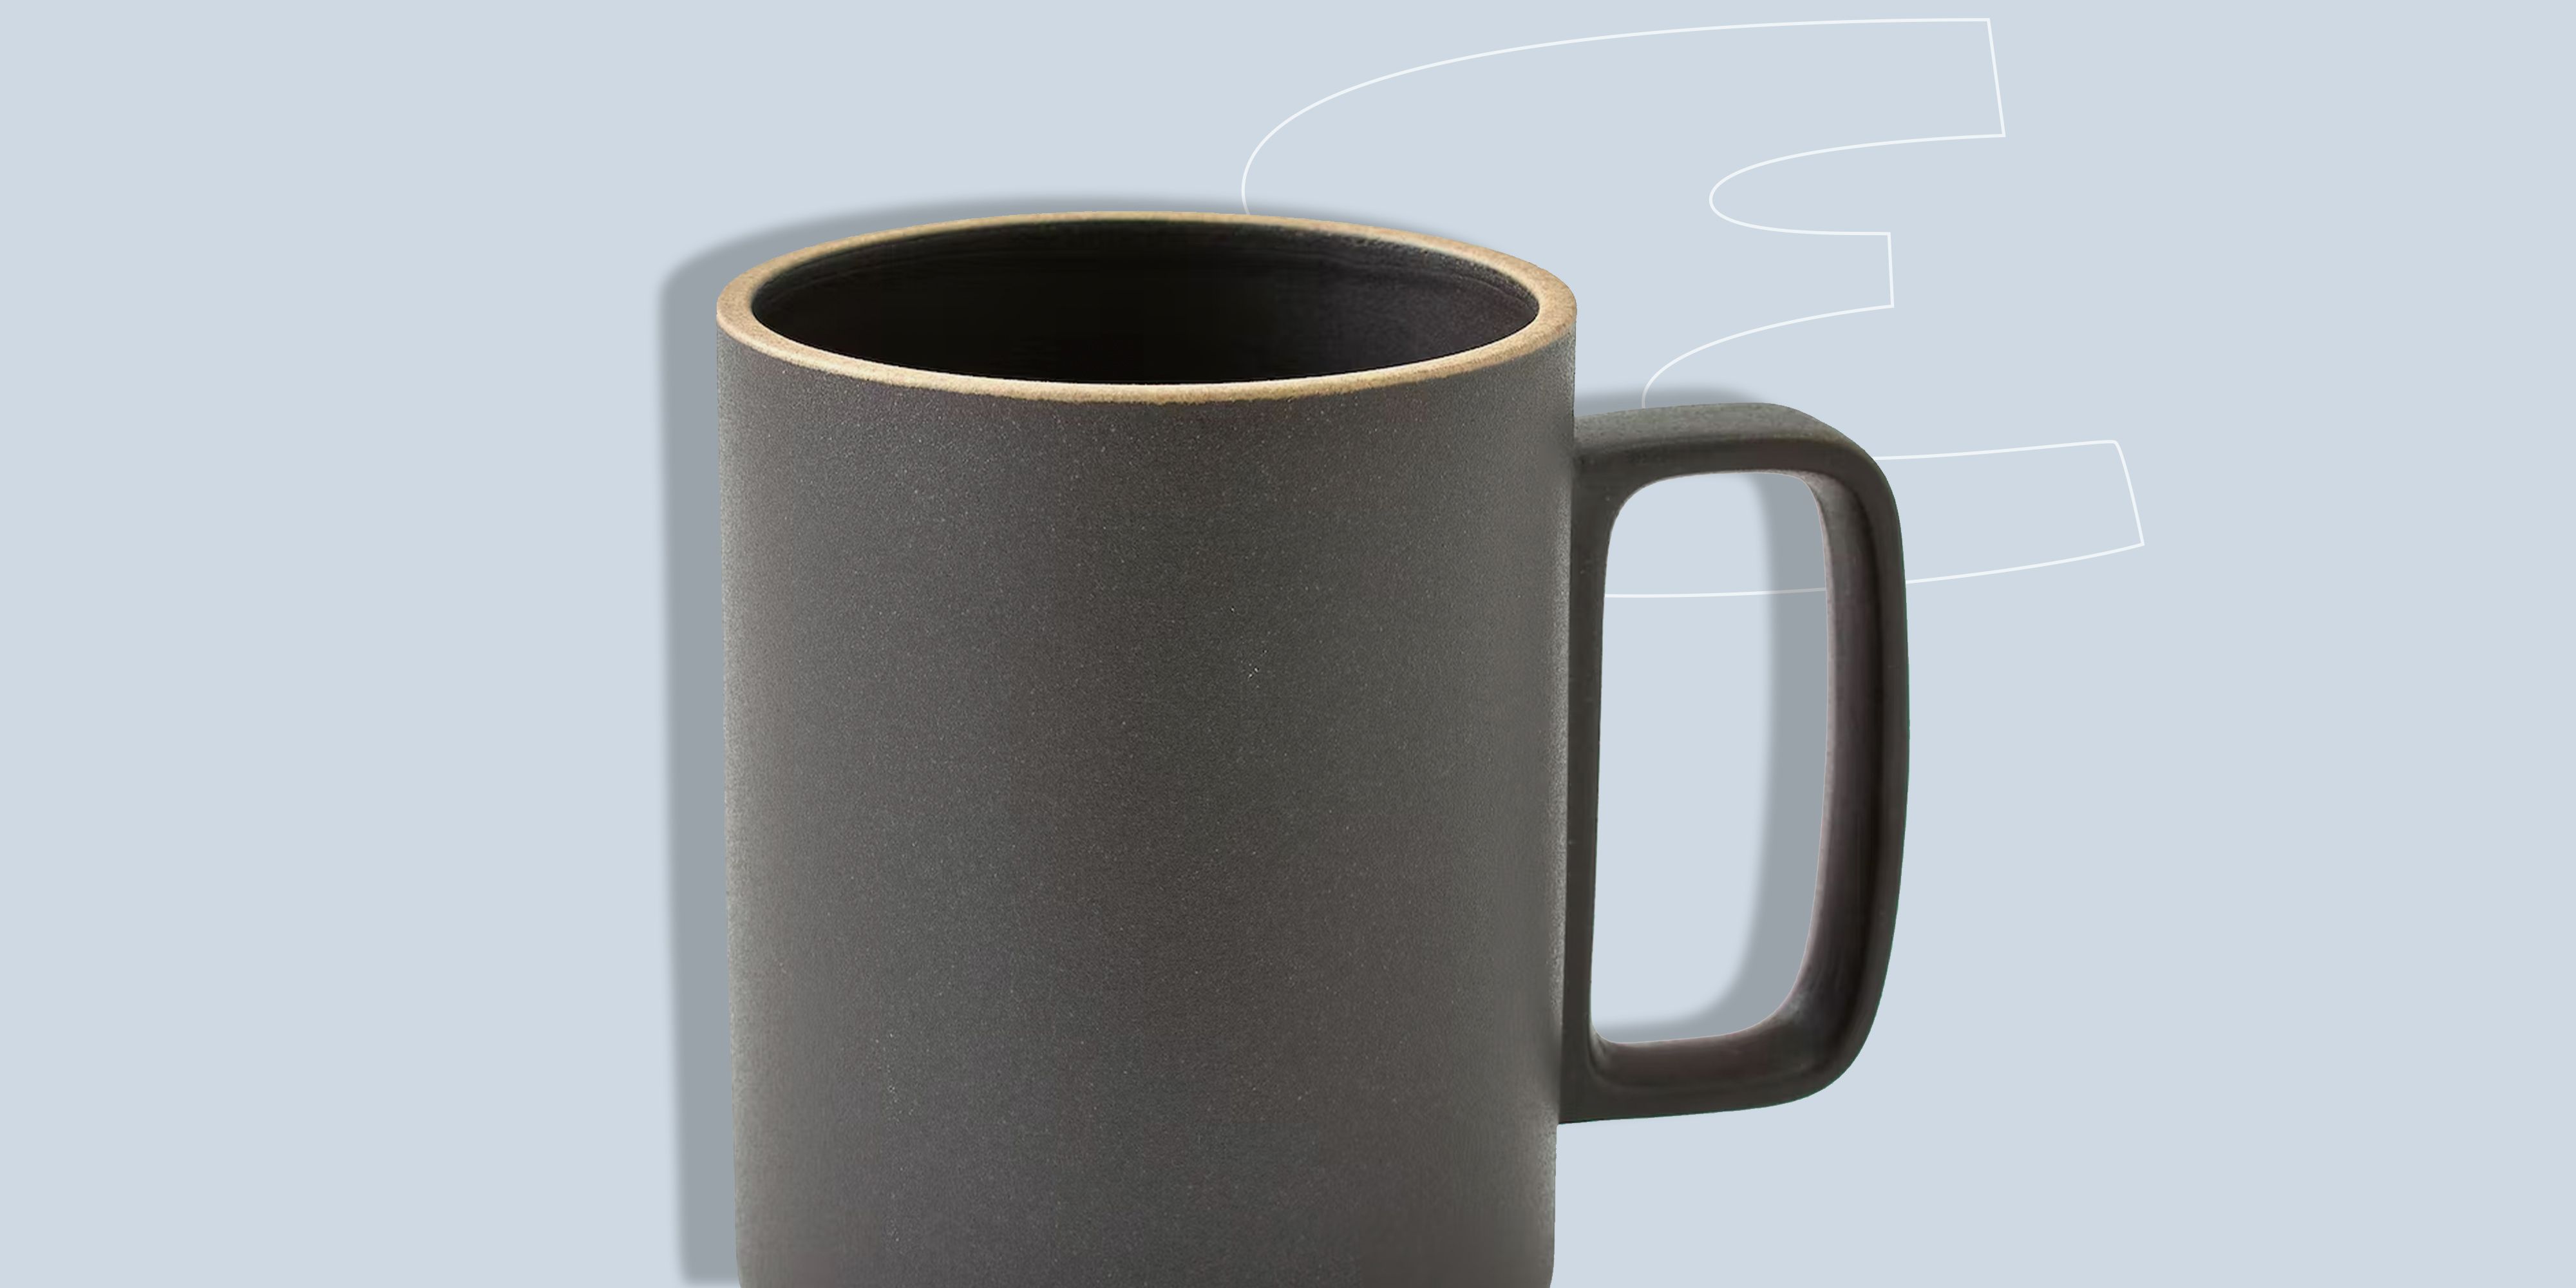 23 Best Coffee Mugs - Cool Mugs to Use at Home